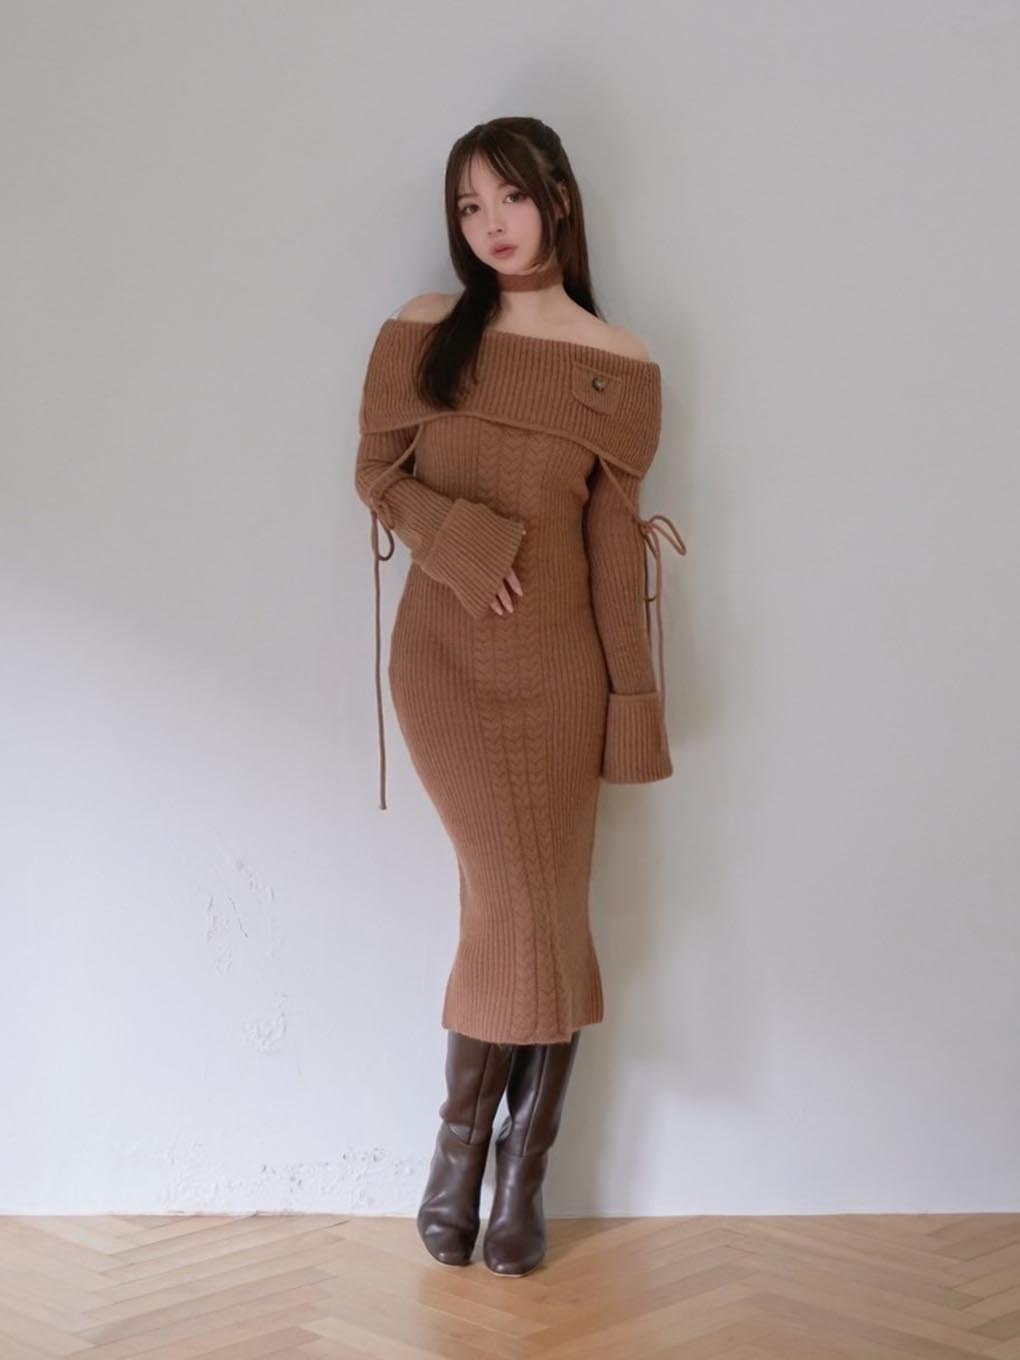 andmary May cable knit dress黒瀧まりあ